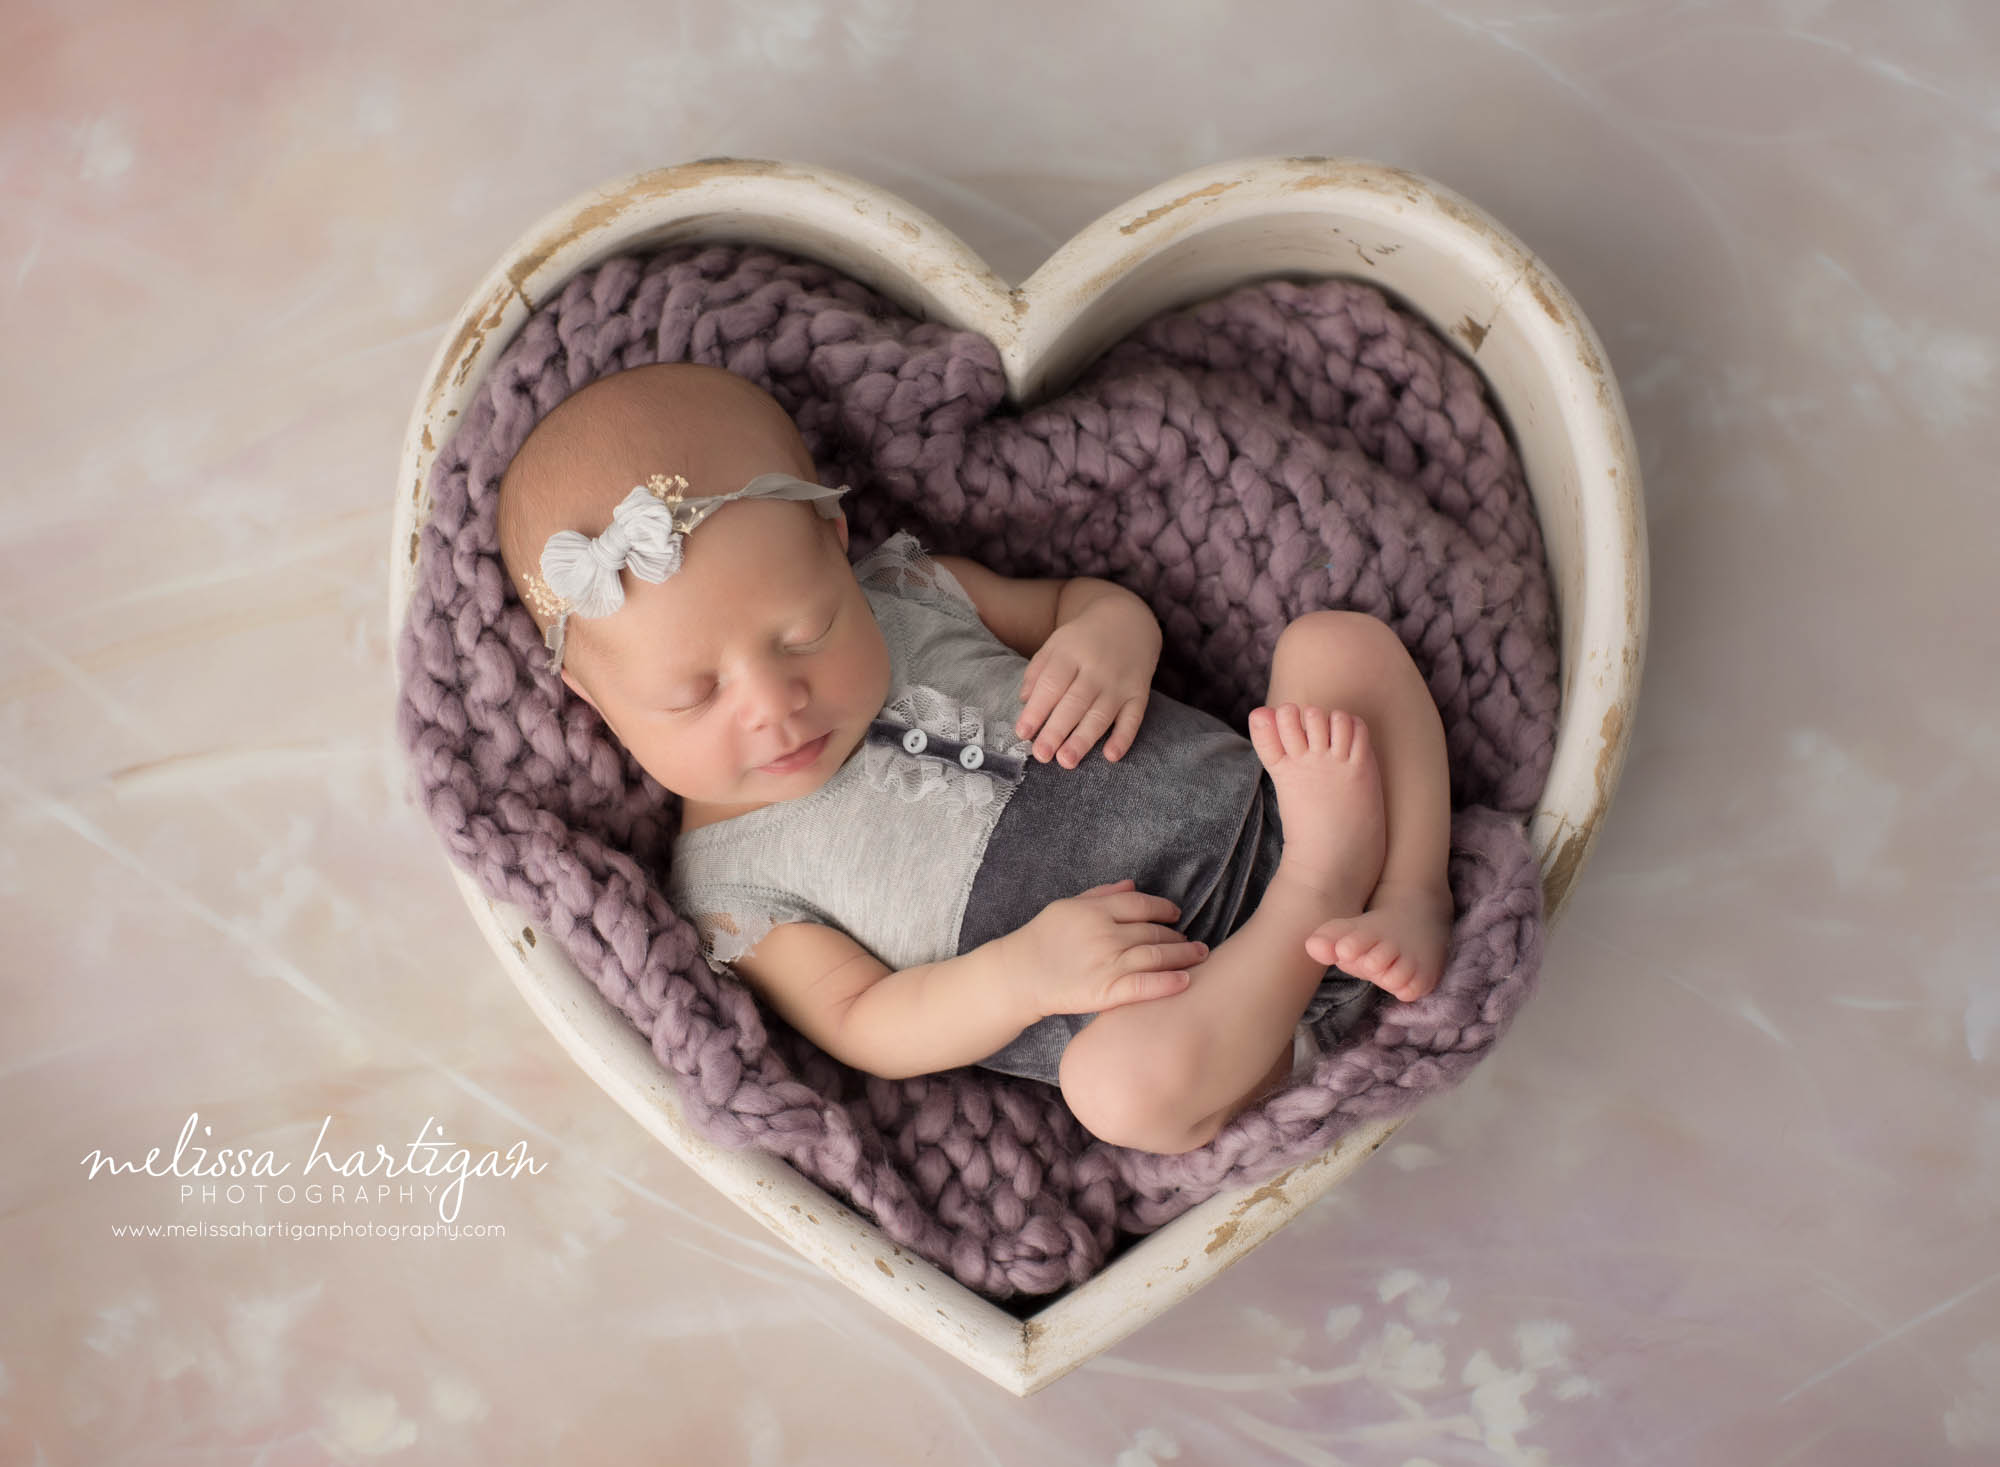 newborn baby girl posed in cream wooden heart bowl prop wearing grey newborn baby outfit and bow headband